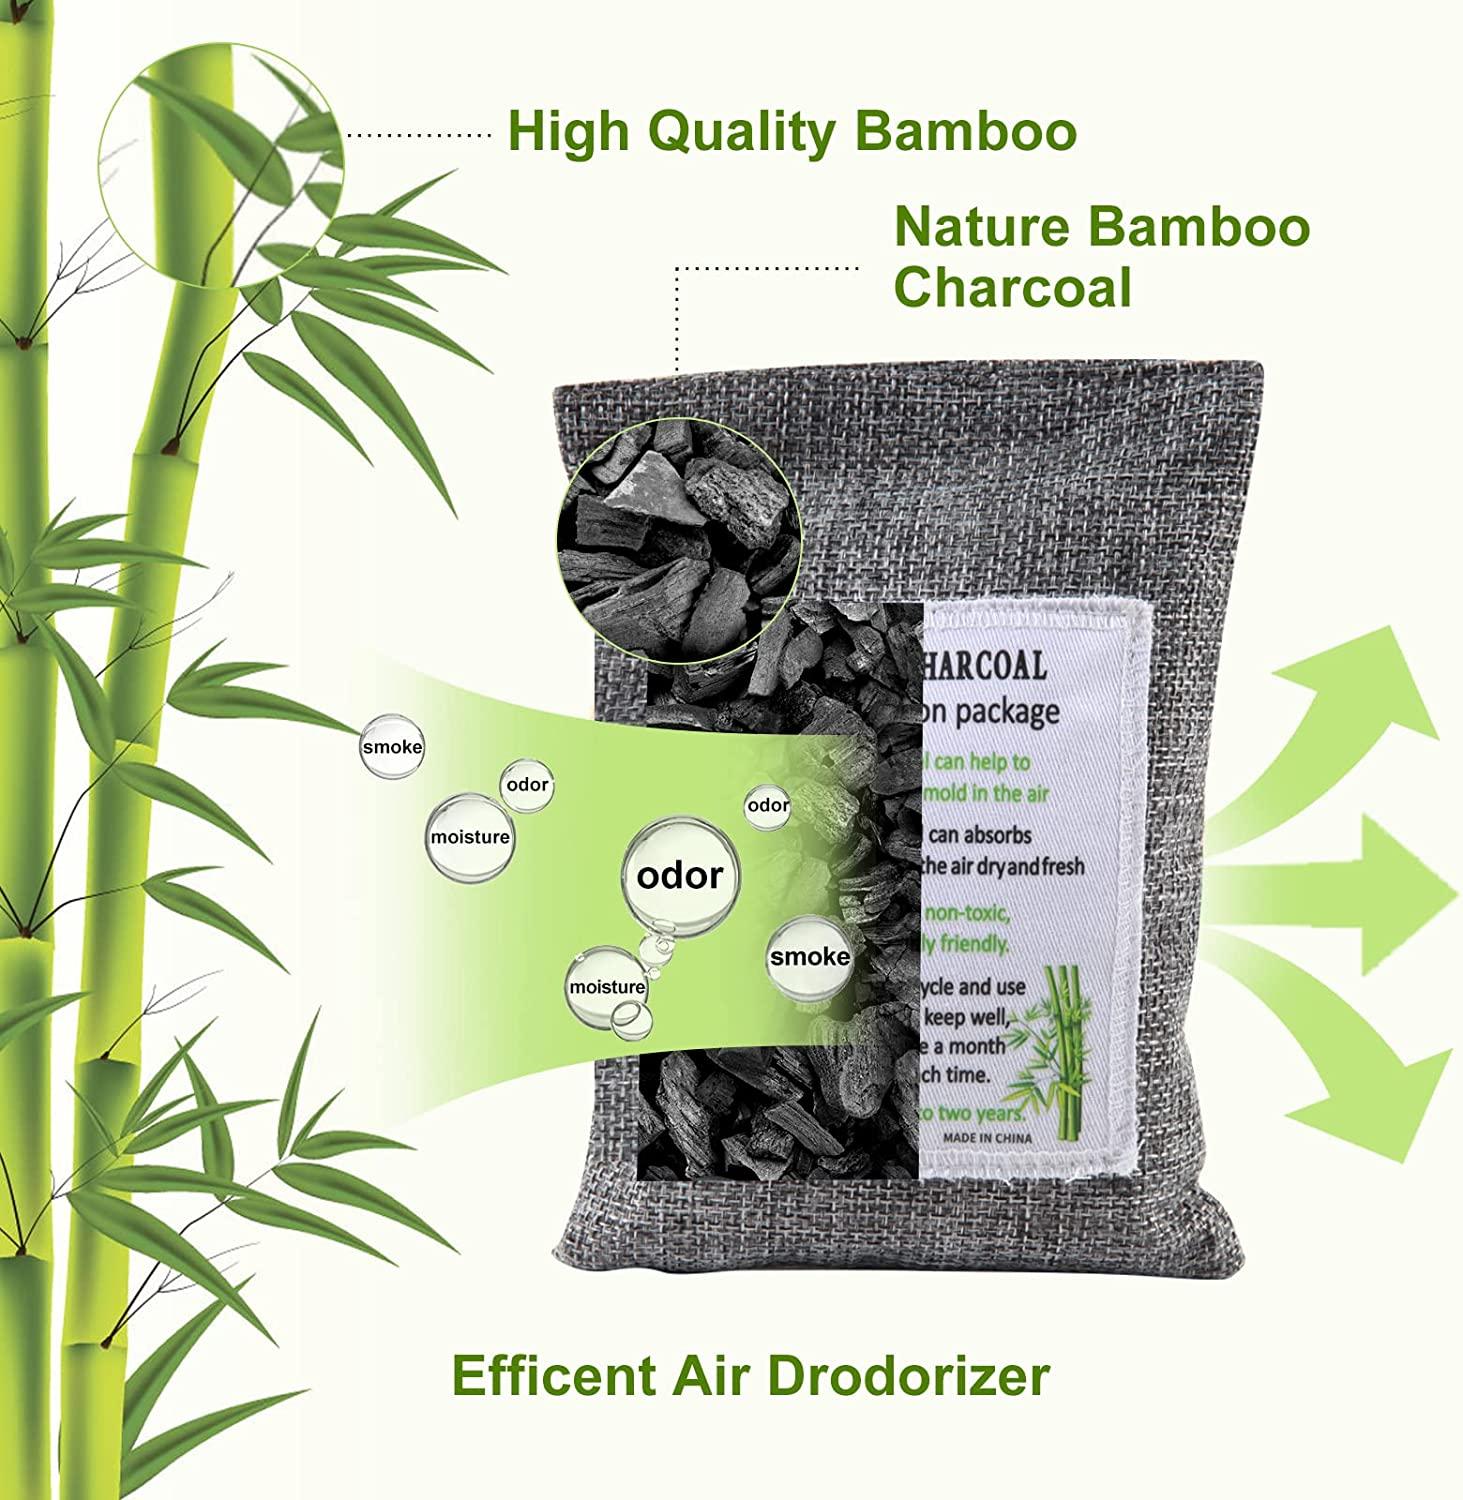 Bamboo Charcoal Odor Eliminator for the Home